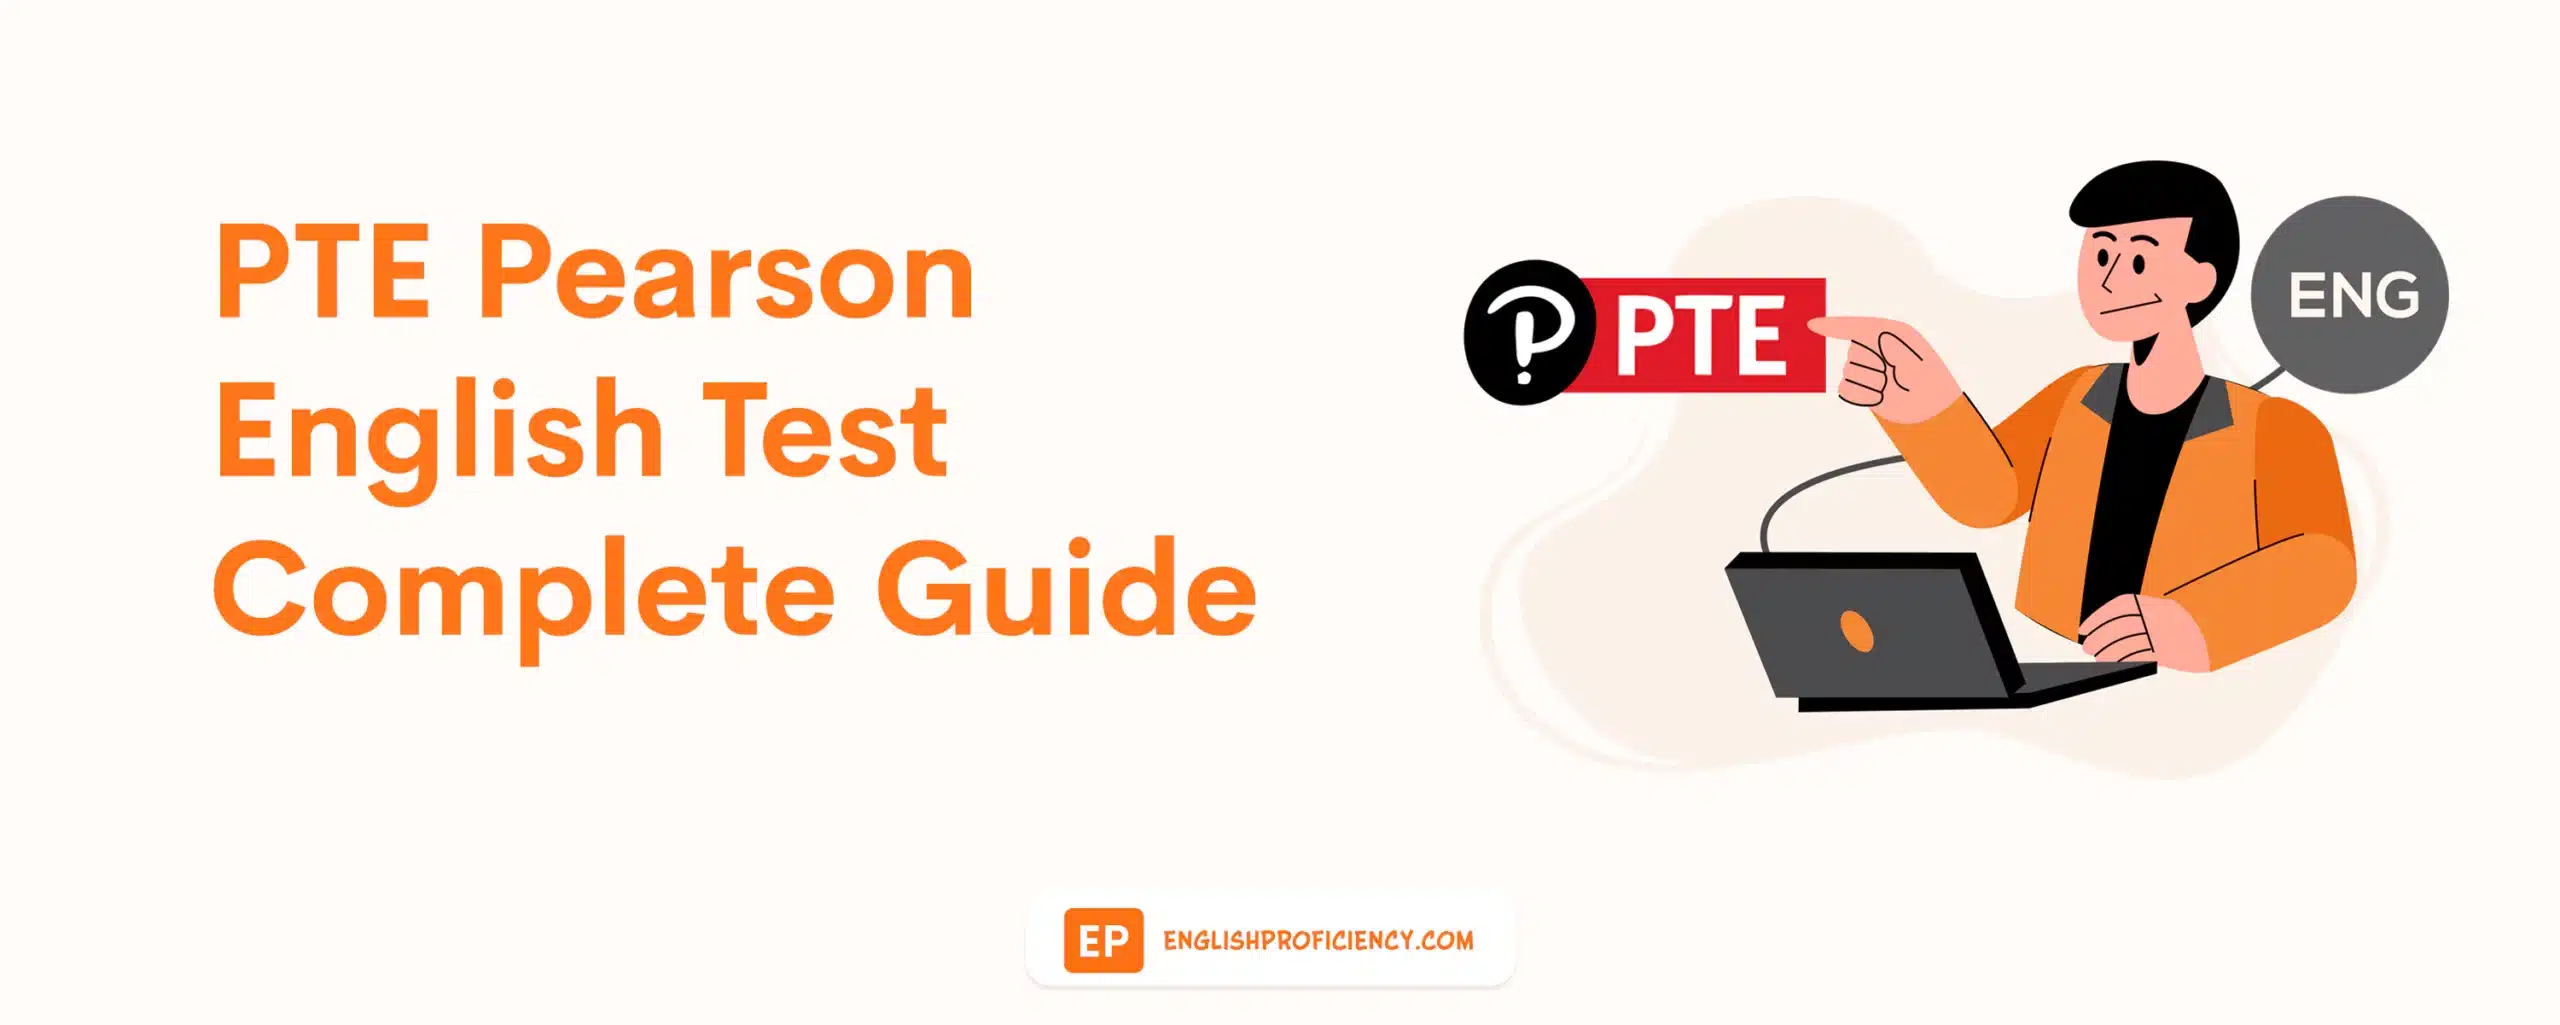 PTE Pearson English Test Complete Guide